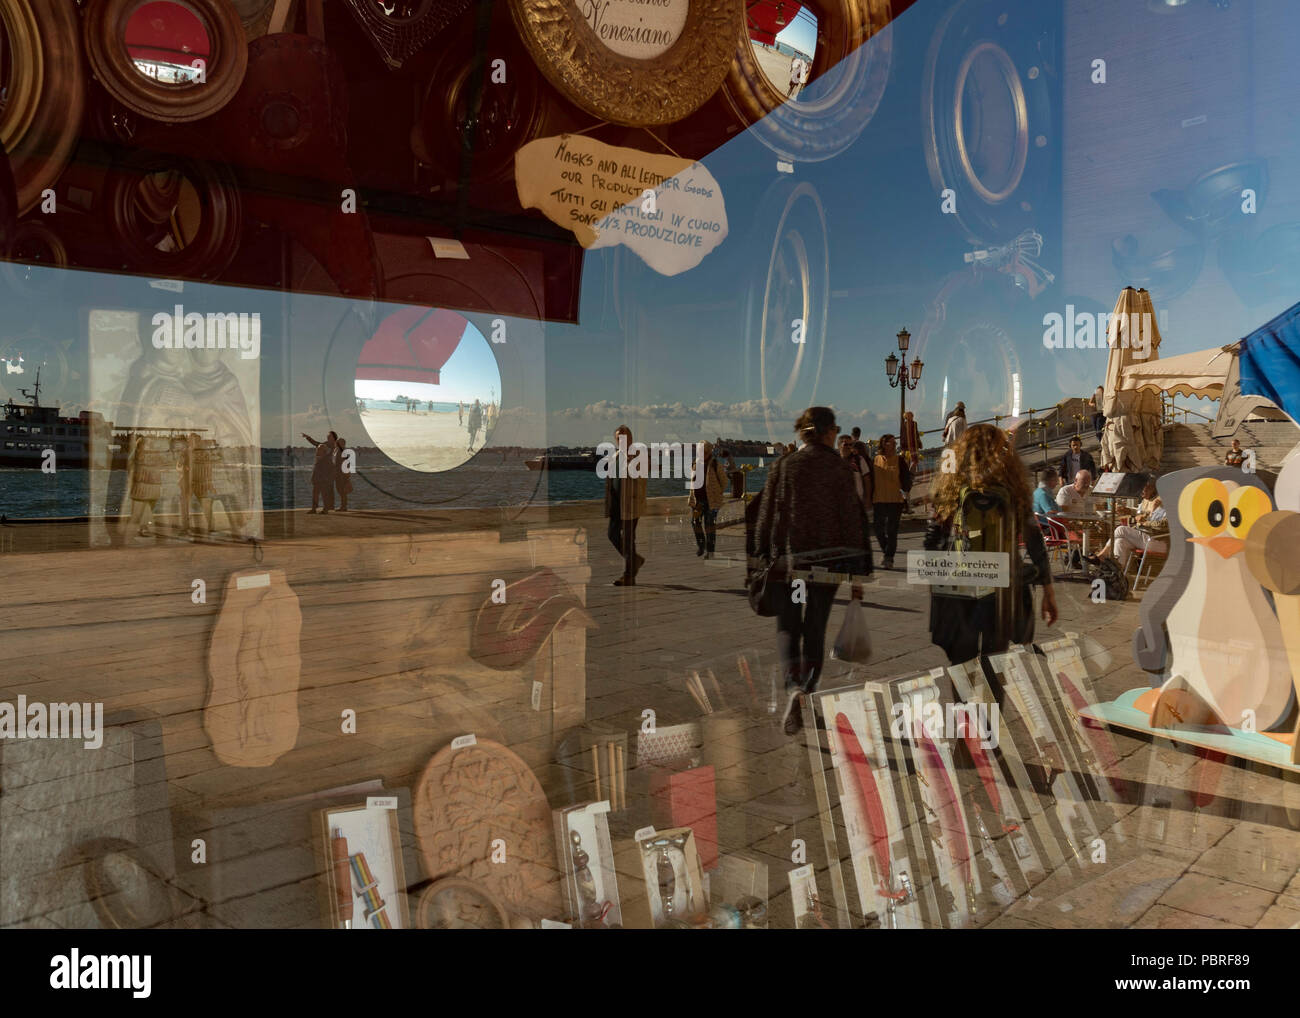 The view in the reflection told the story well in Venice Stock Photo